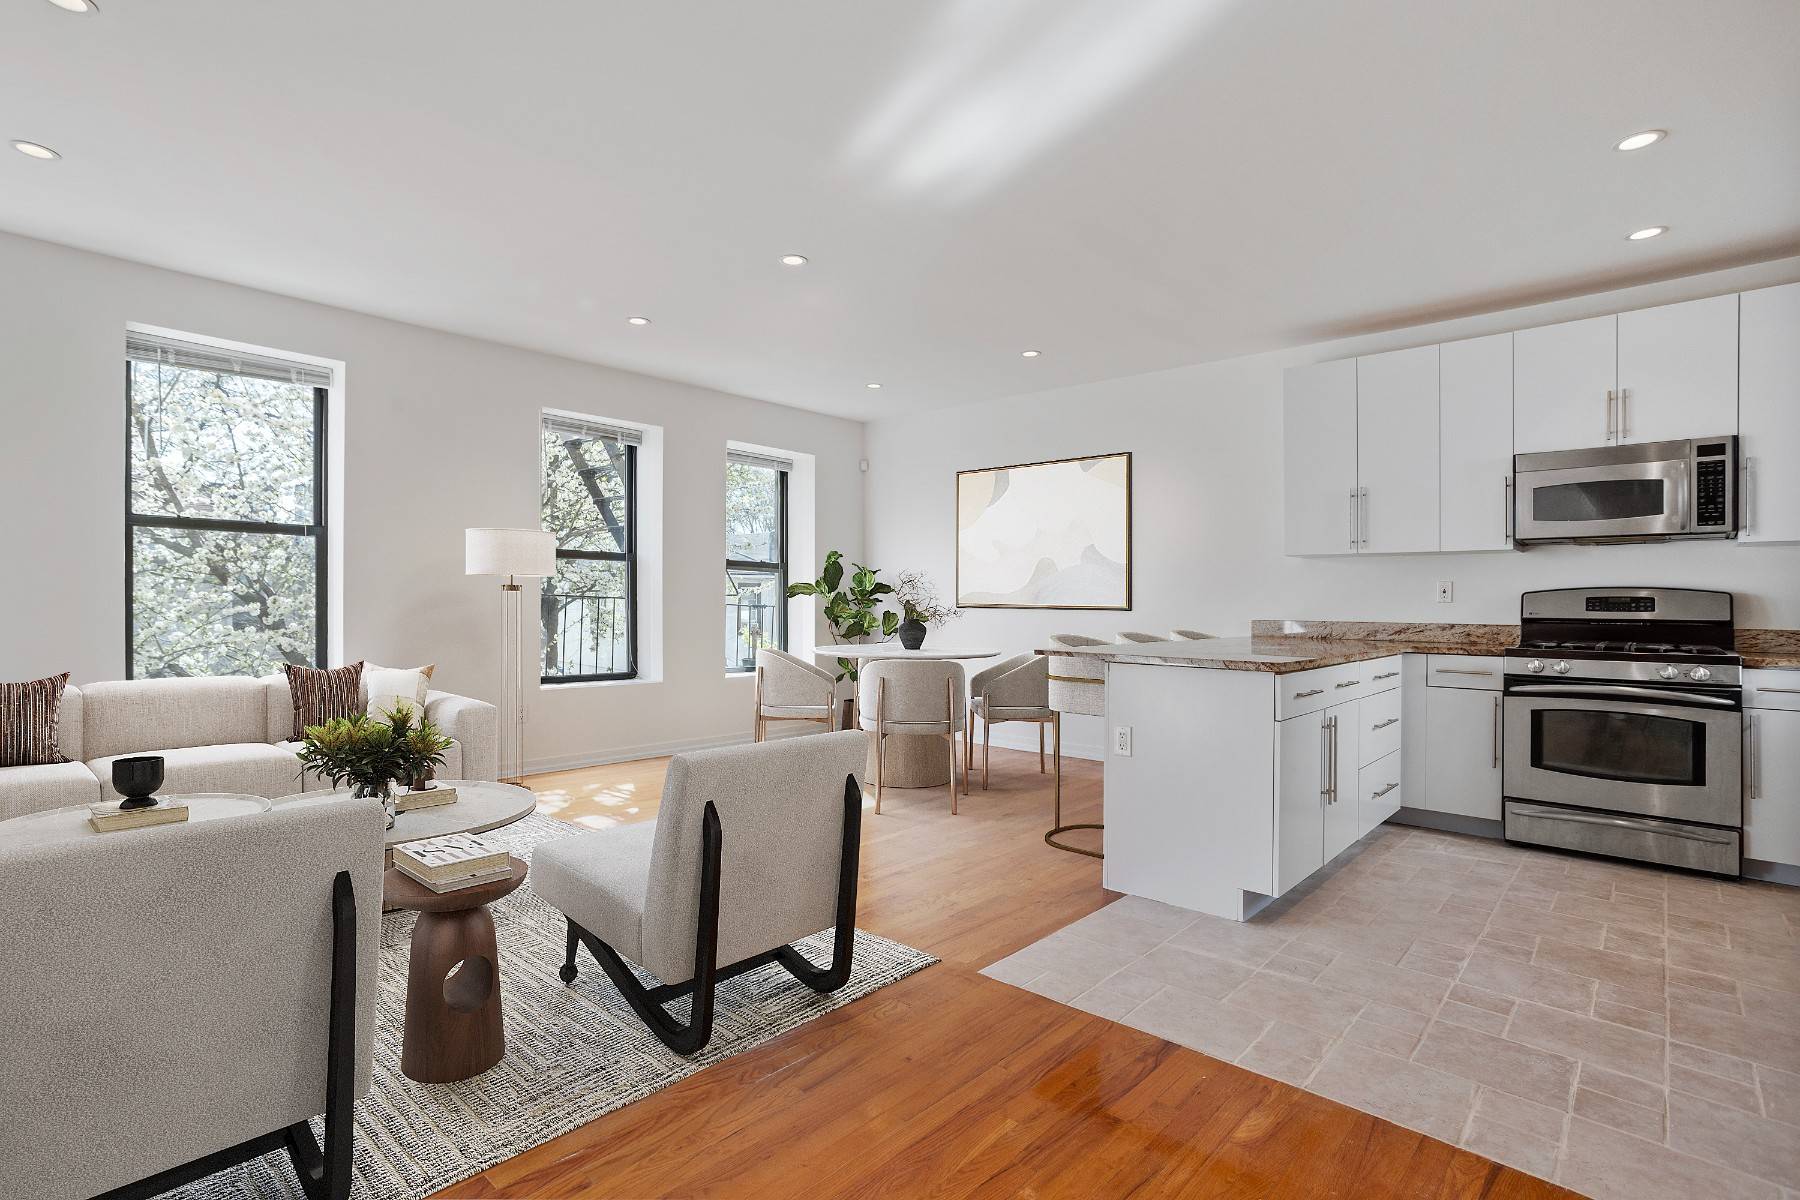 Experience urban serenity in the heart of Brooklyn's Homecrest neighborhood at 1733 E 14th St.